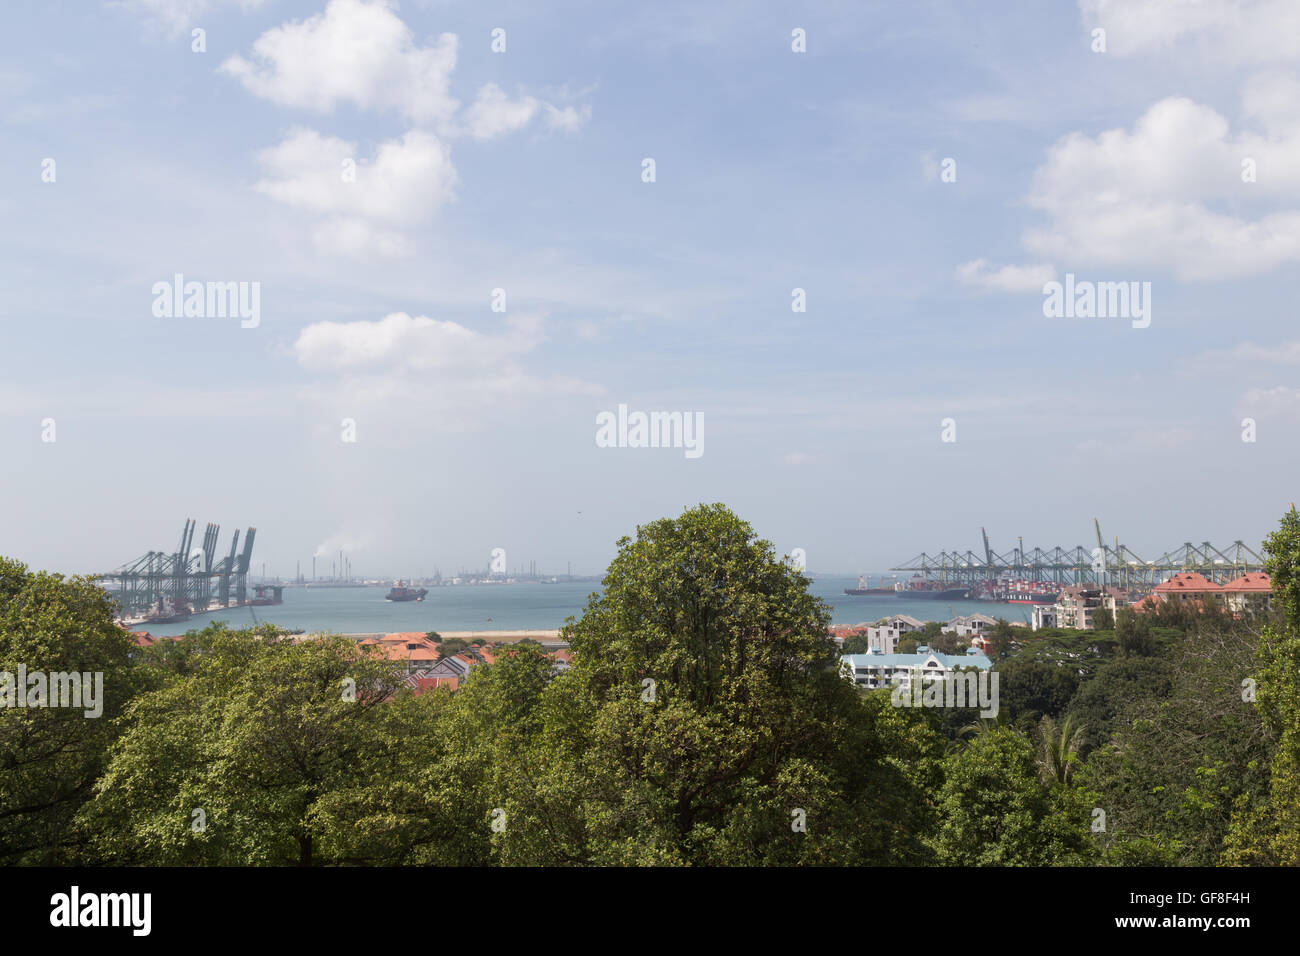 Singapore, Singapore - February 01, 2015: View of the container terminal from the Southern Ridges Stock Photo